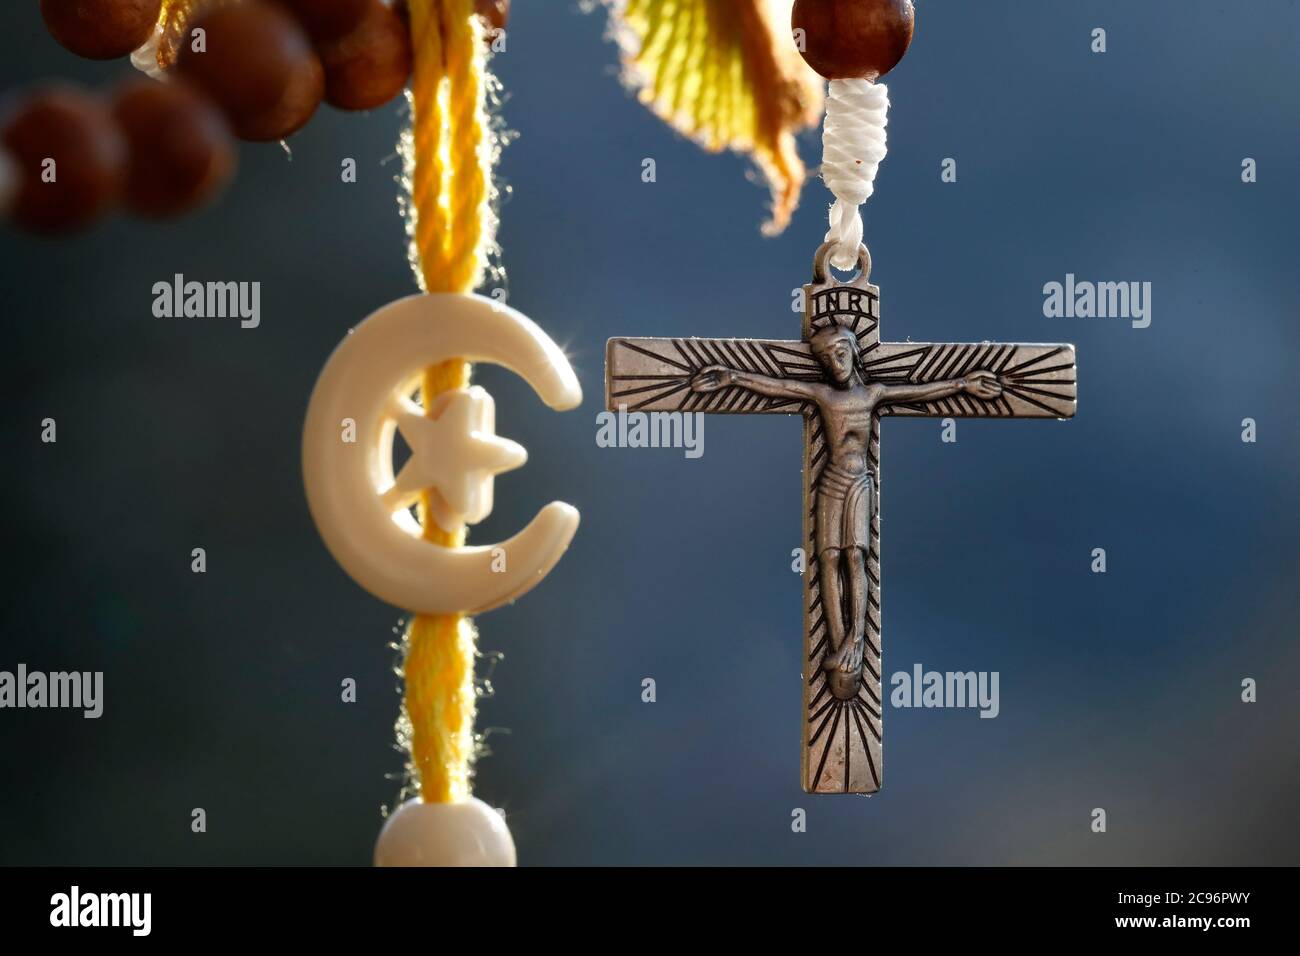 Christianity and Islam 2 monotheistic religions. Christian cross and islamic cross and crescent :  Interreligious symbols. France. Stock Photo